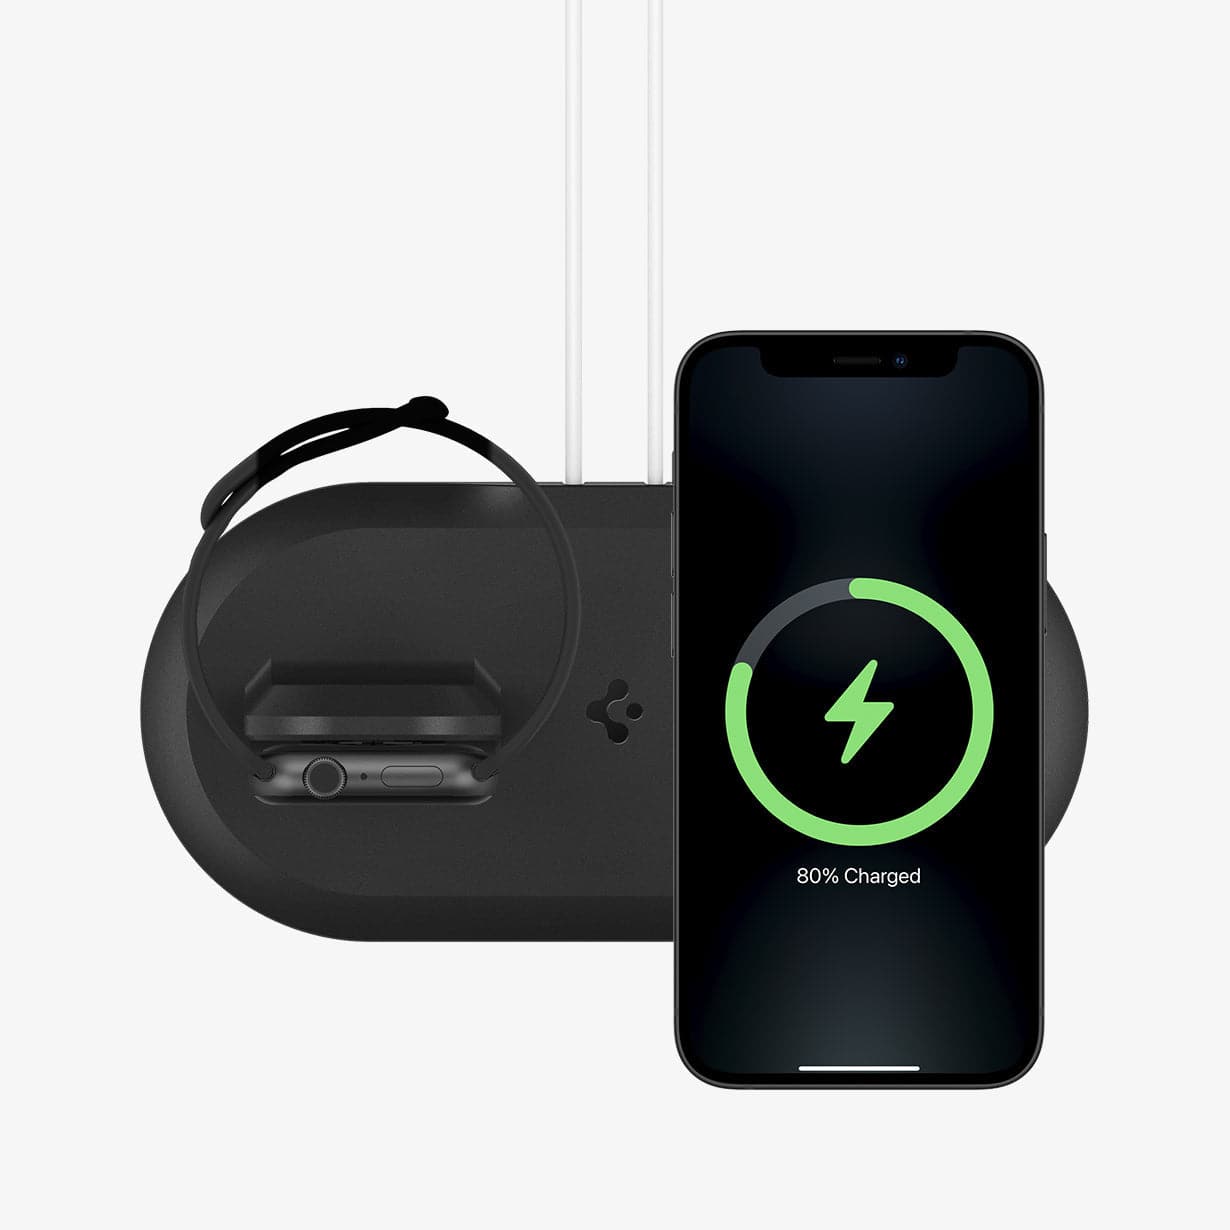 AMP02796 - Mag Fit Duo in black showing the top view with iPhone and Apple Watch charging